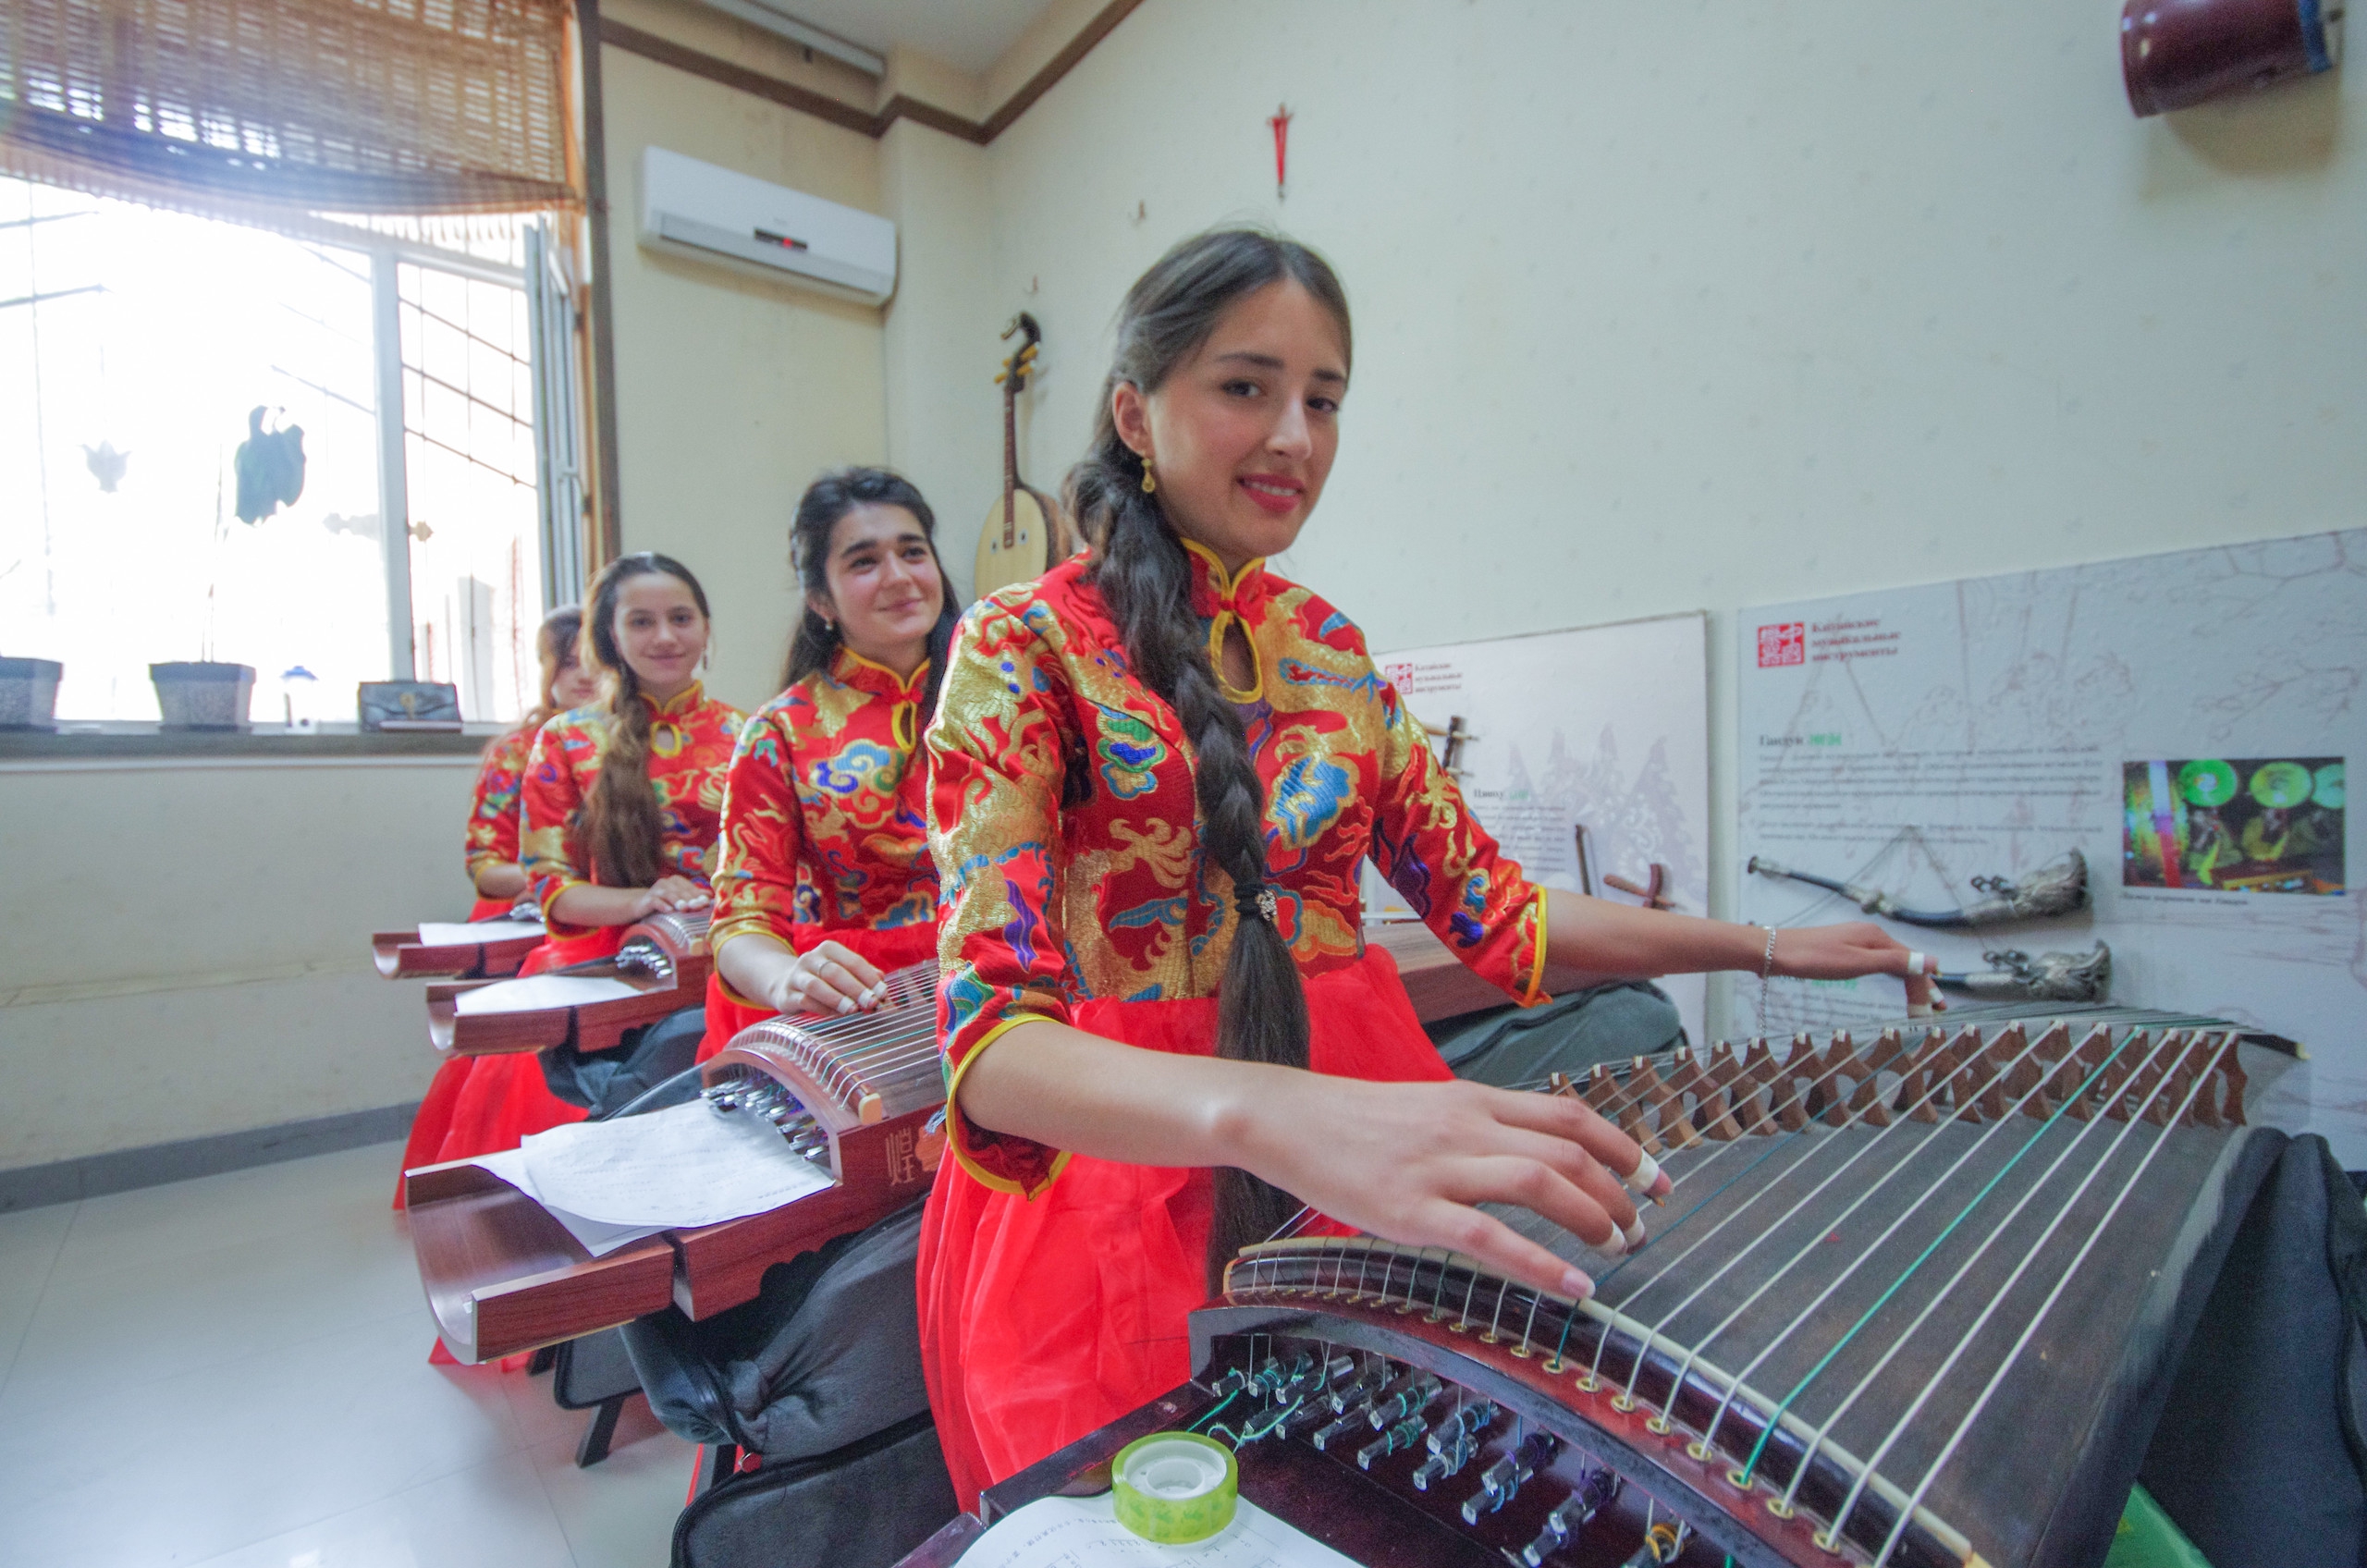 A file photo shows students from the Confucius Institute in Dushanbe, the capital of Tajikistan, performing the guzheng. The Confucius Institute at the Tajik National University is a non-profit educational institution. Through their programs, local people can learn about and experience Chinese culture, bolstering friendly relations between the two countries. /IC